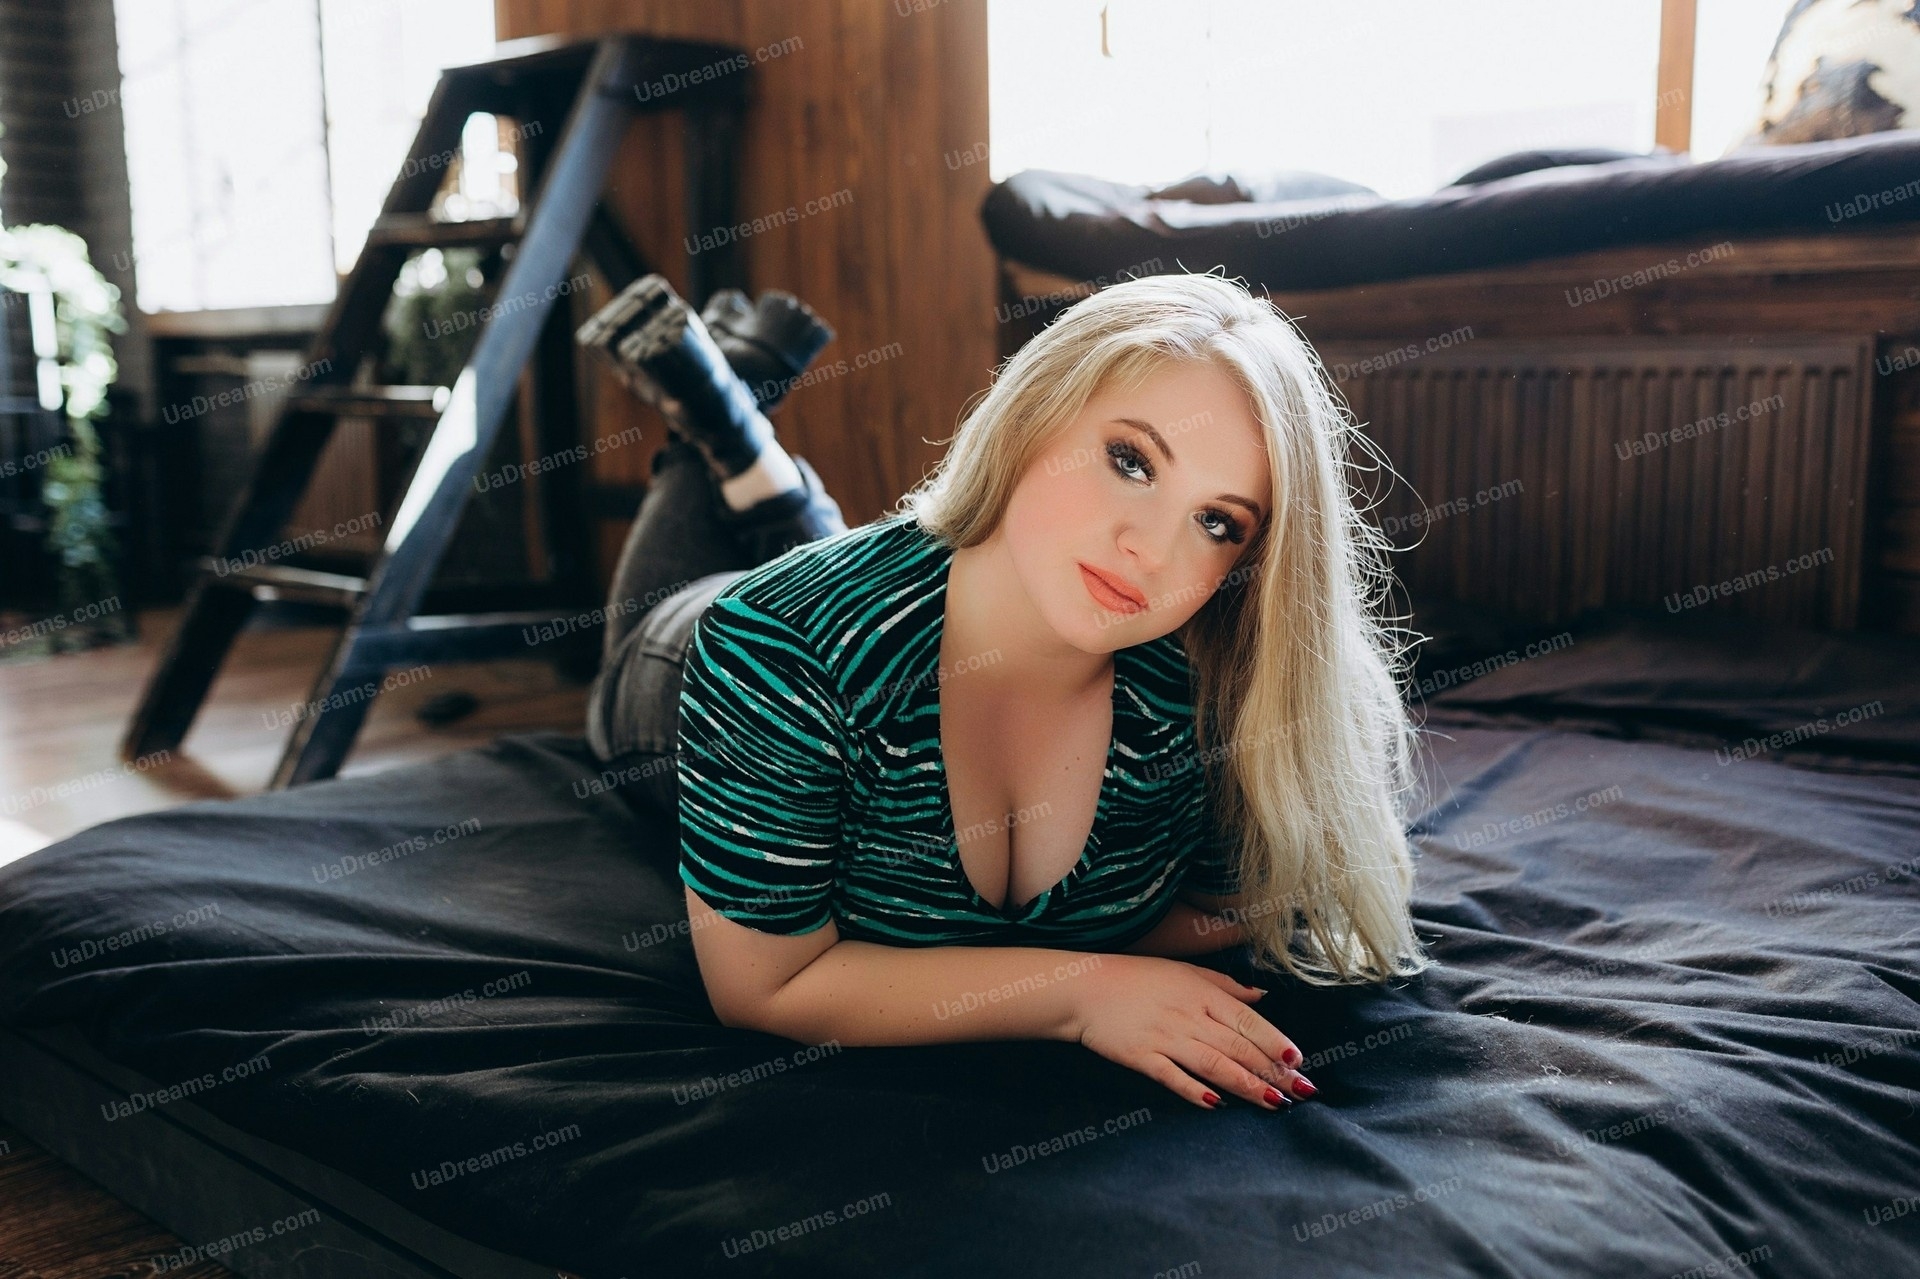 Kate Dnipro 19 y.o. - intelligent lady - small public photo.